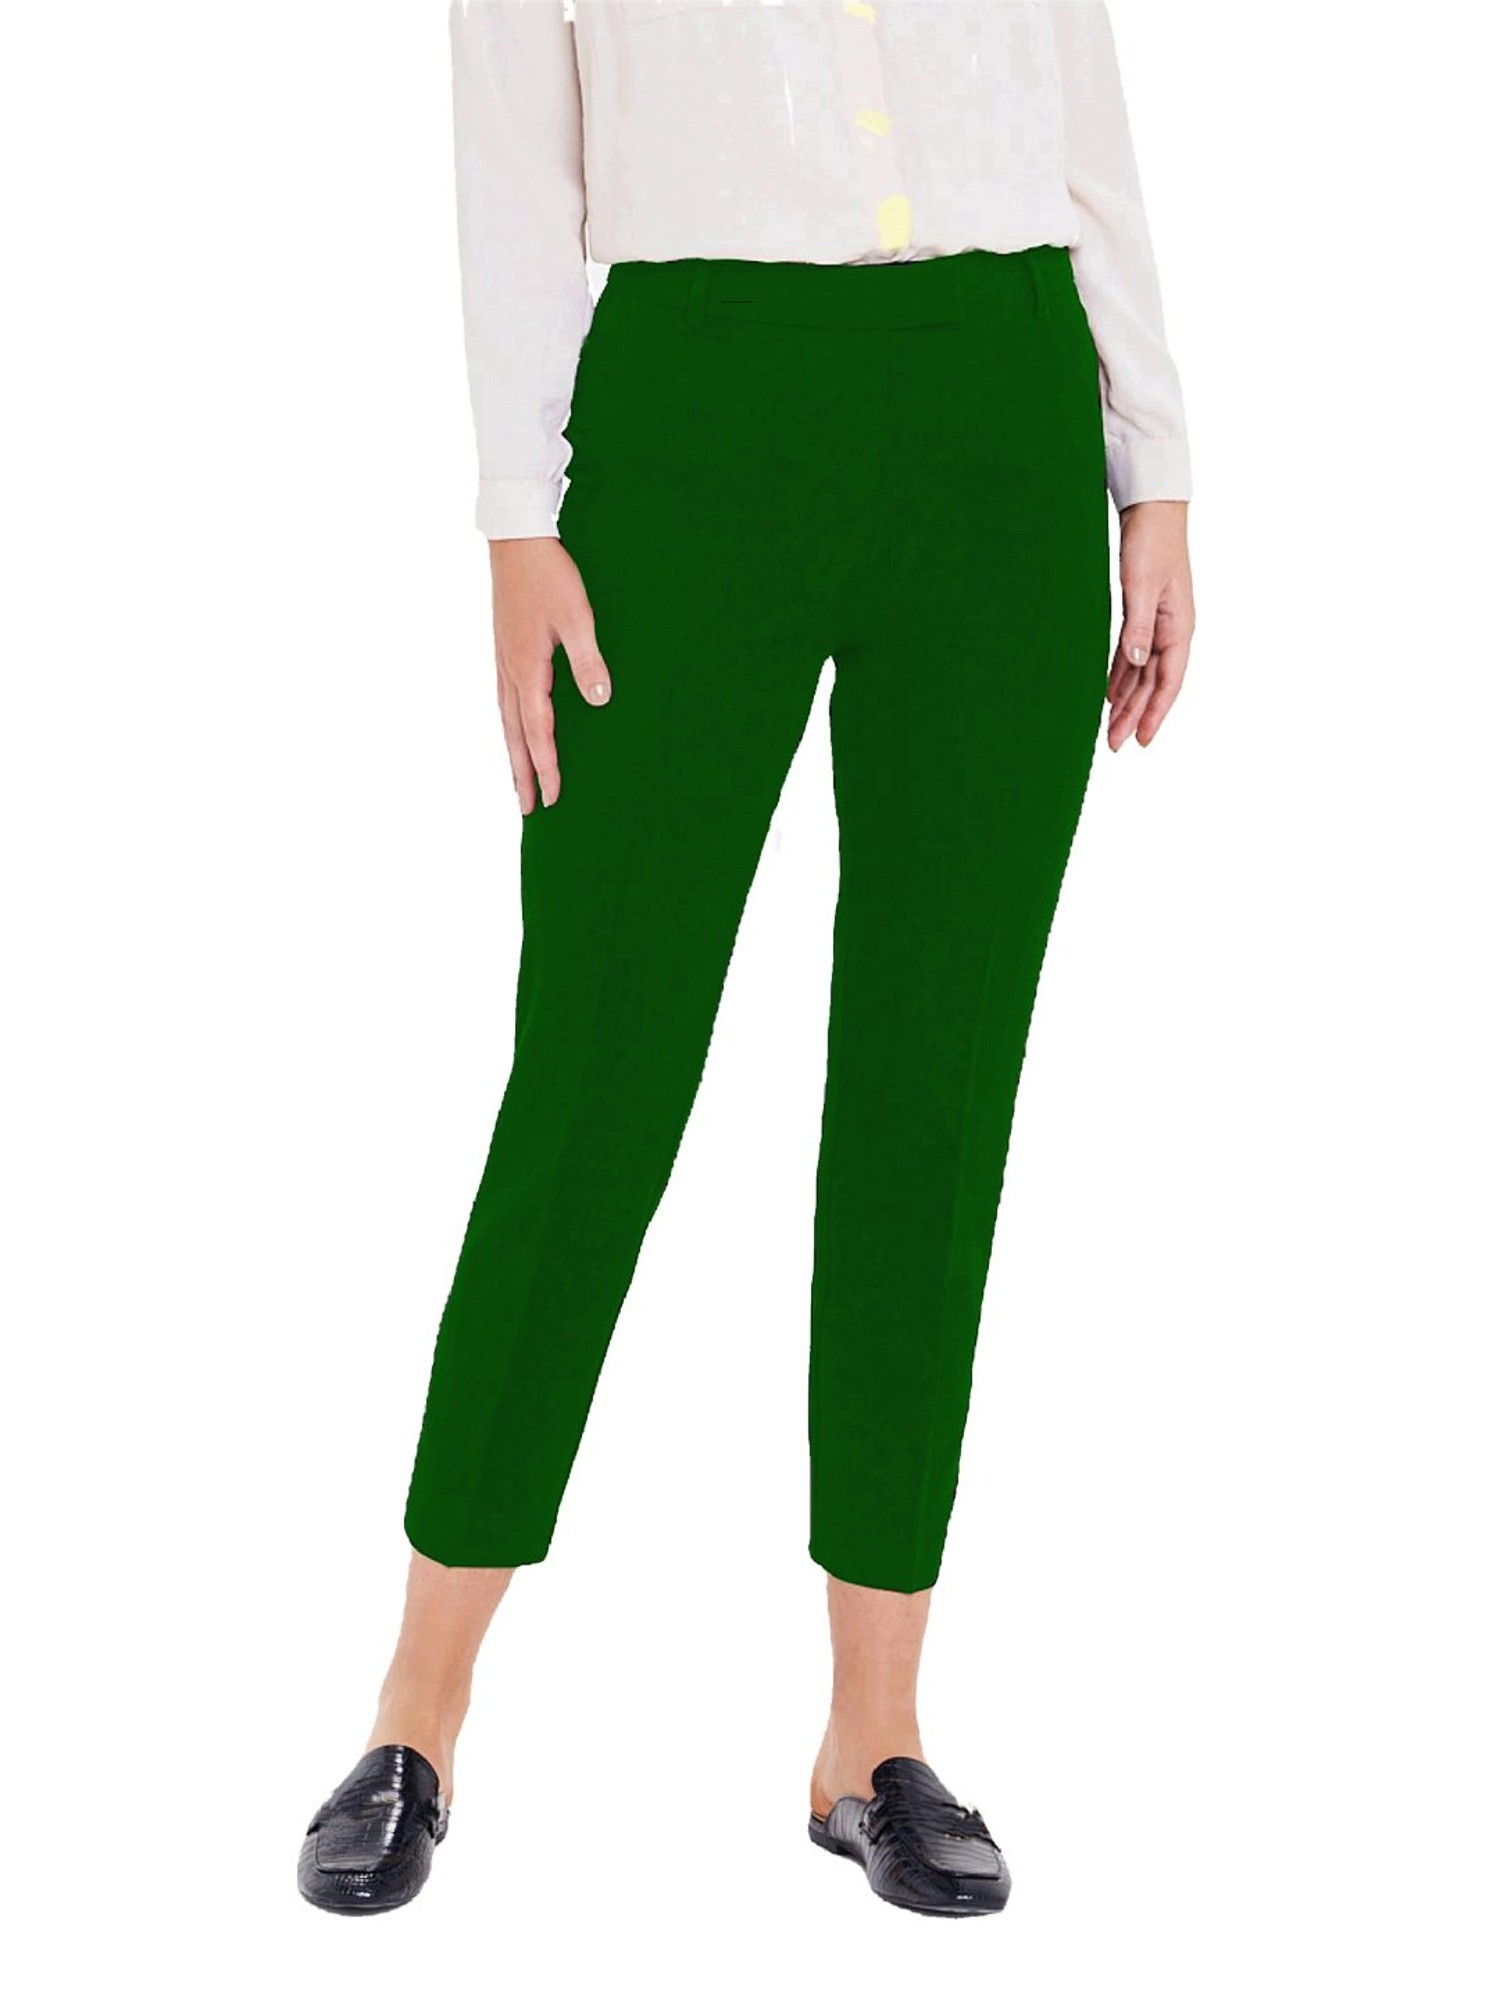 350 Best Green pants outfit ideas | green pants outfit, green pants, outfits-mncb.edu.vn